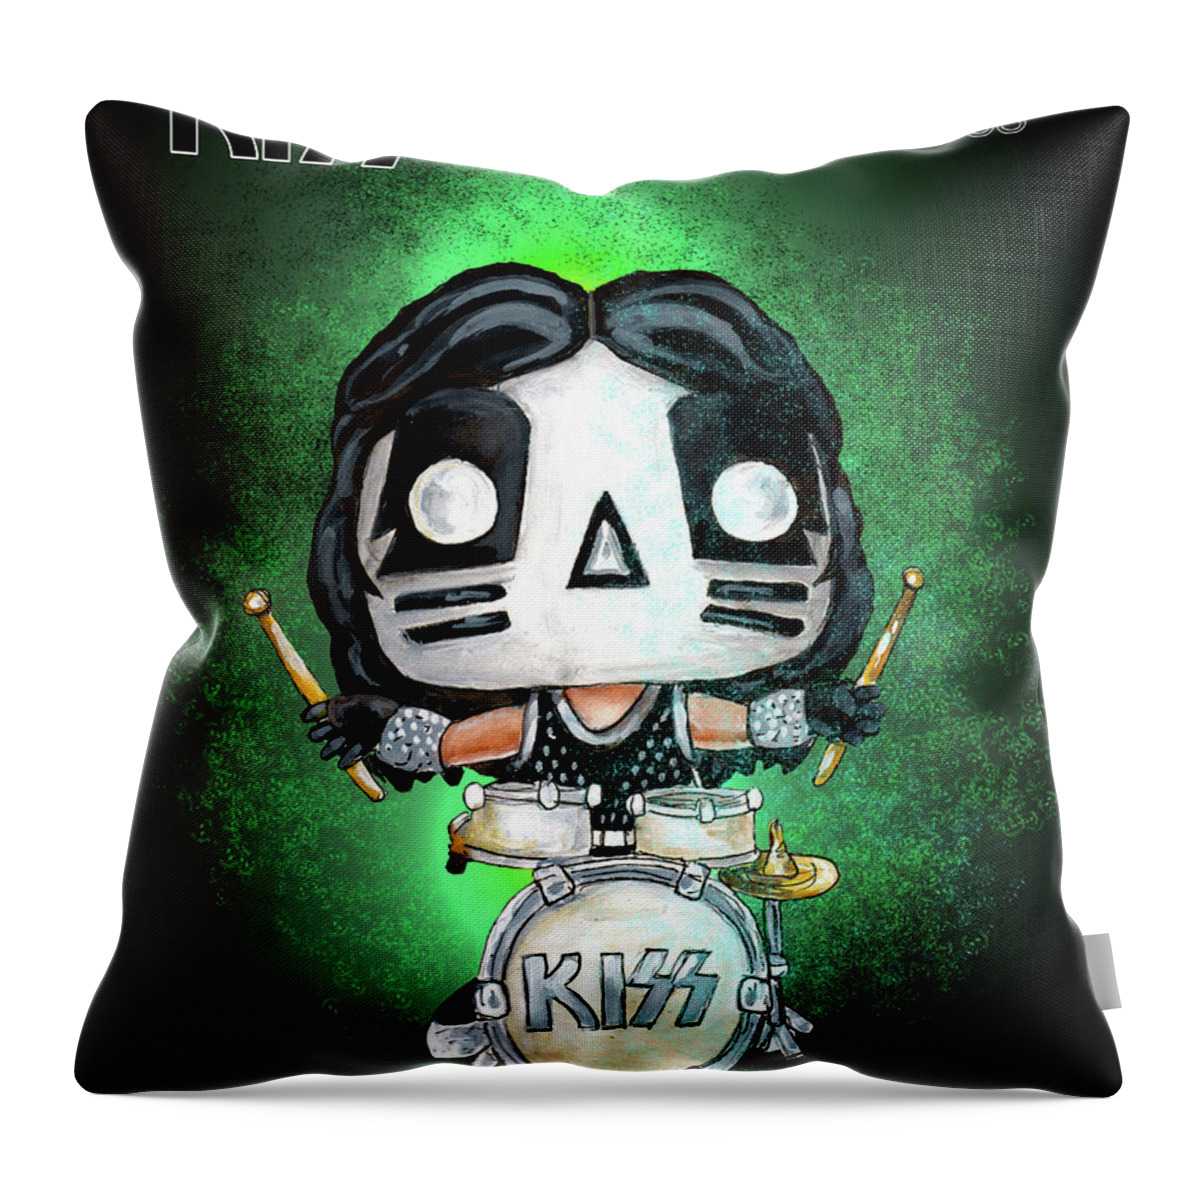 Music Throw Pillow featuring the painting Funko Peter Criss by Miki De Goodaboom